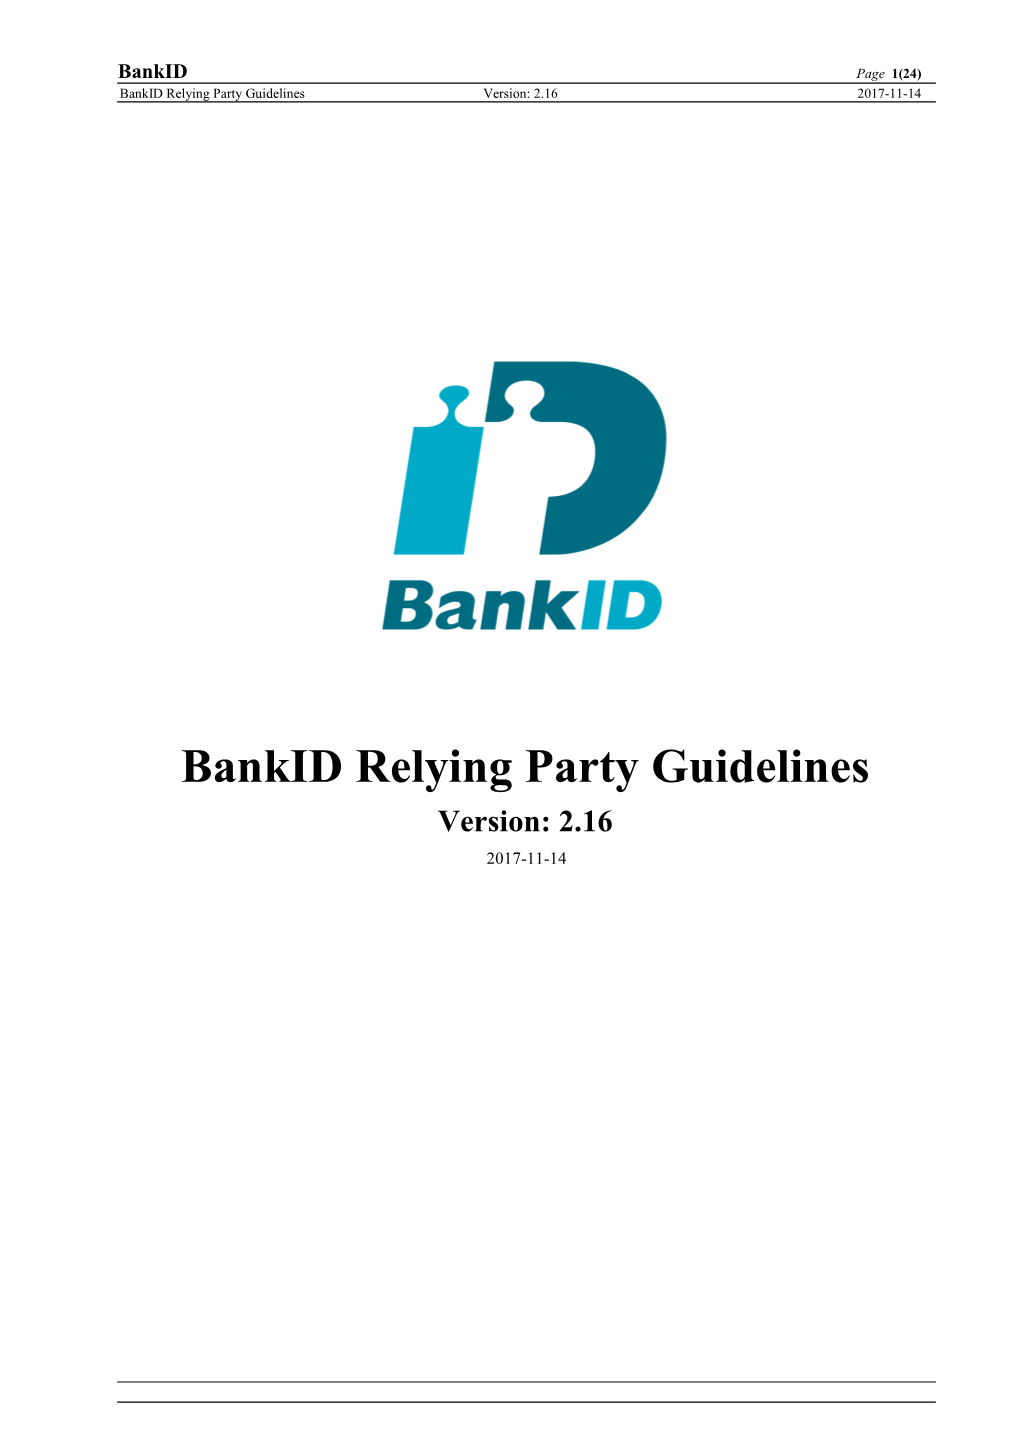 Bankid Relying Party Guidelines Version: 2.16 2017-11-14